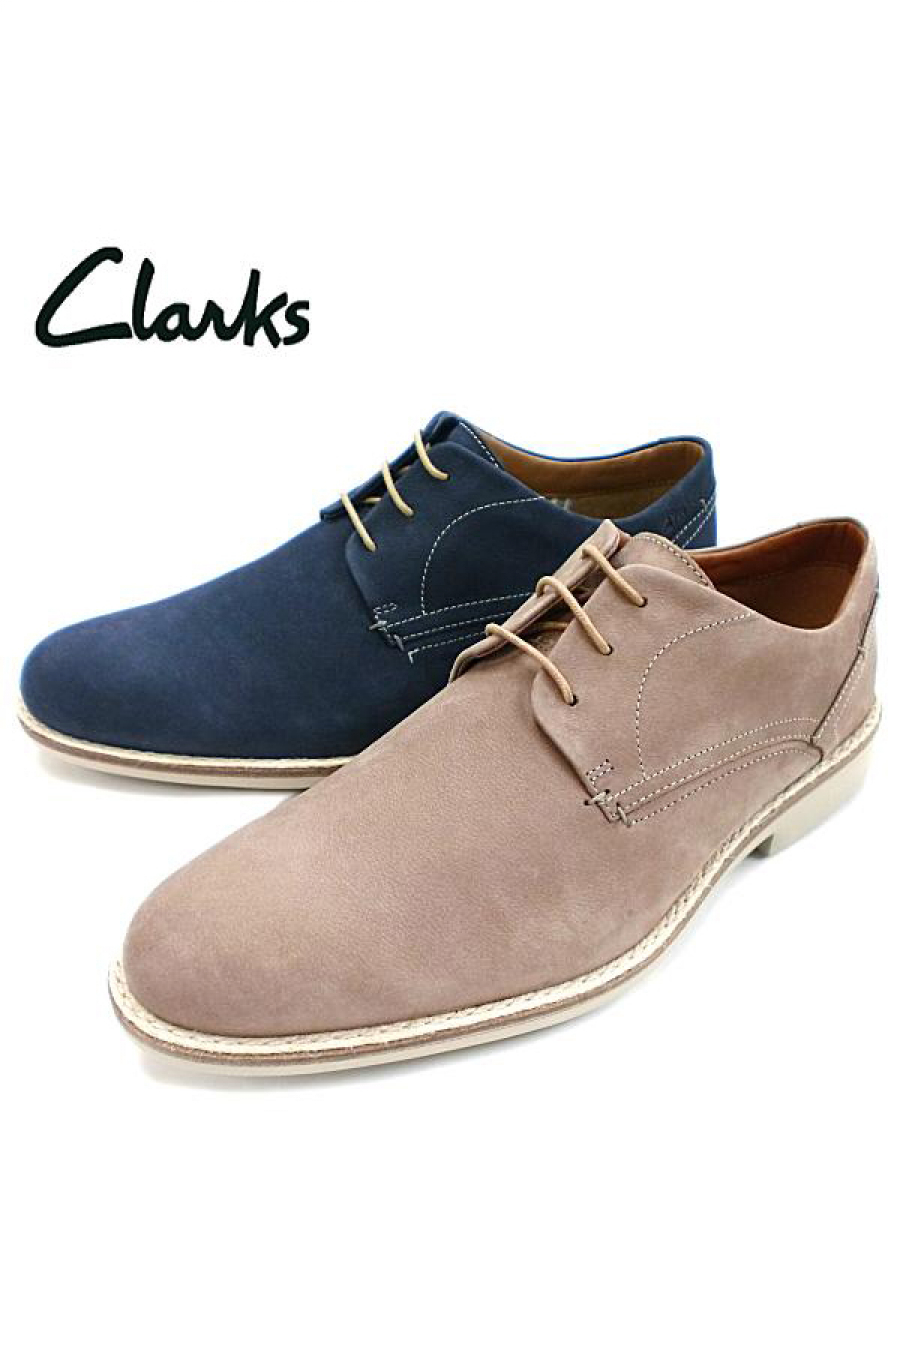 Kirk & appoints Clark of Clarks shoes family as chairman